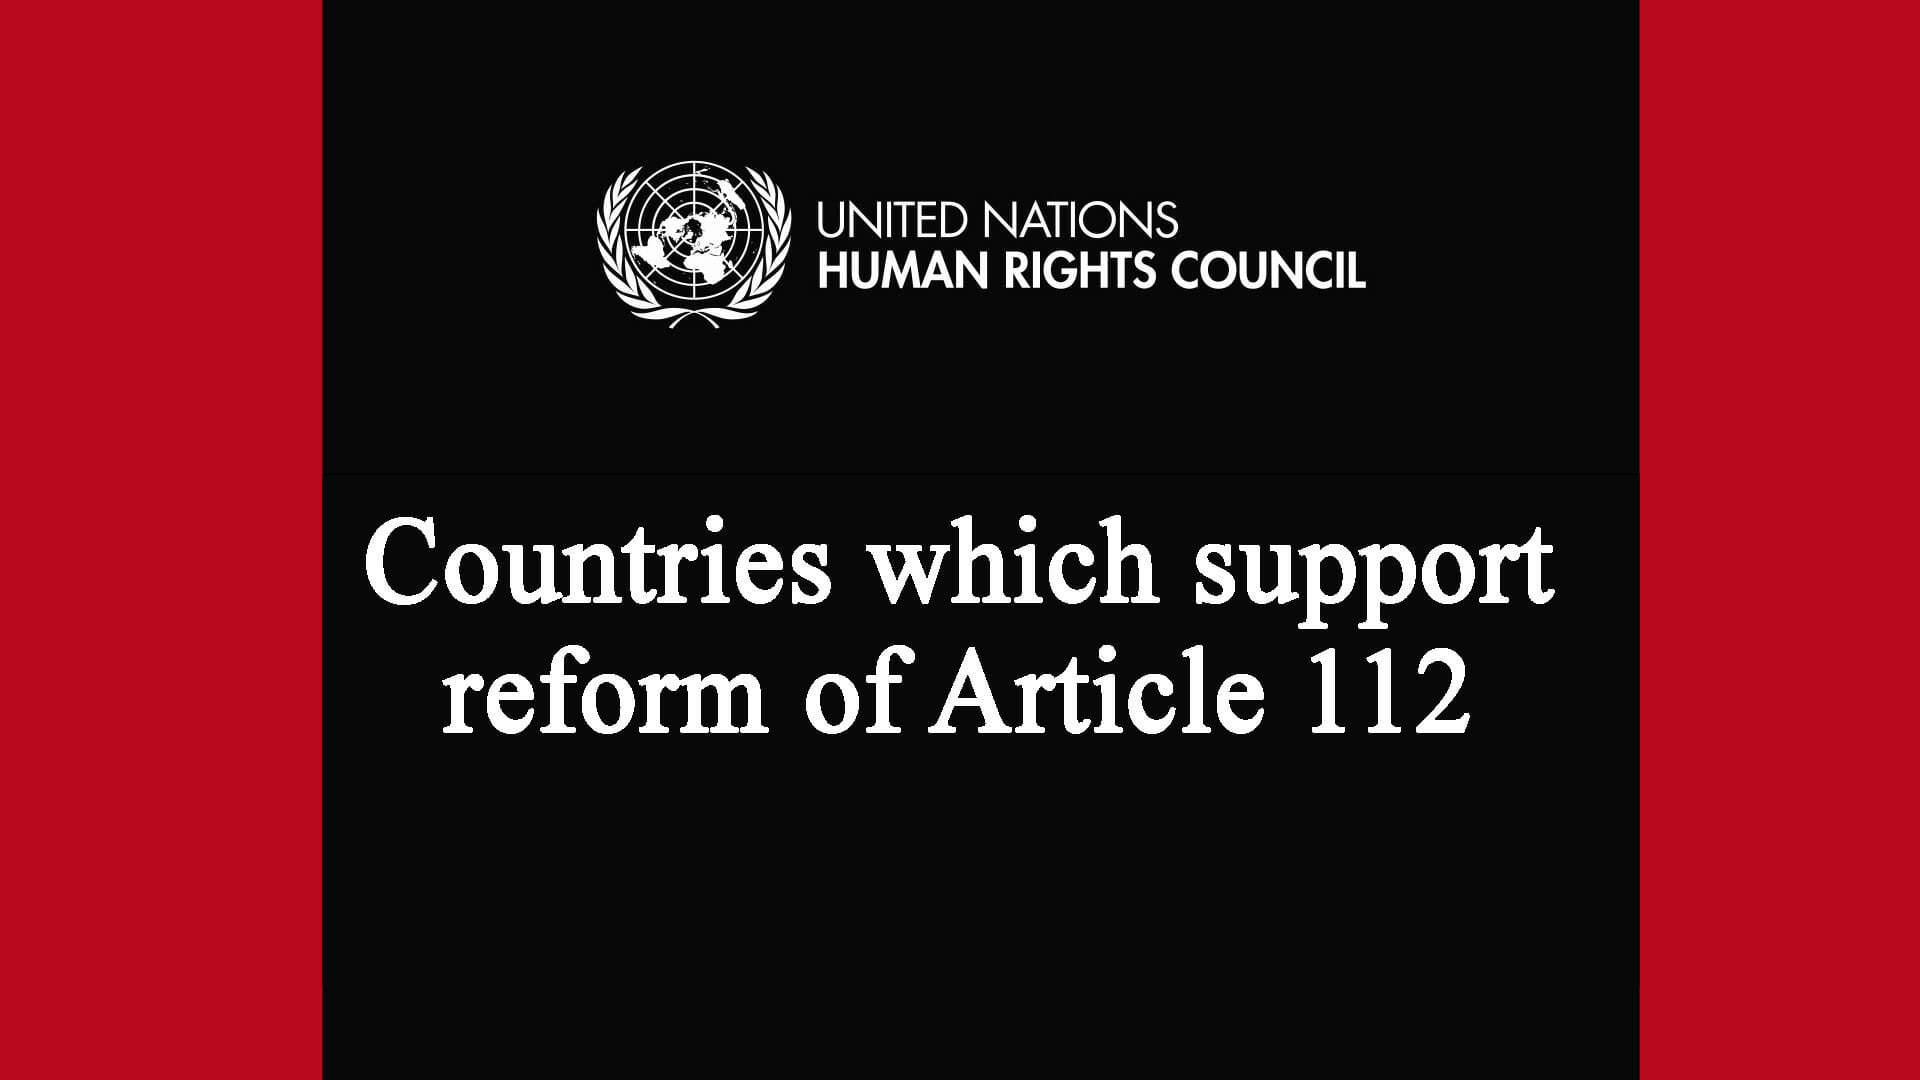 Countries which support reform of article 112